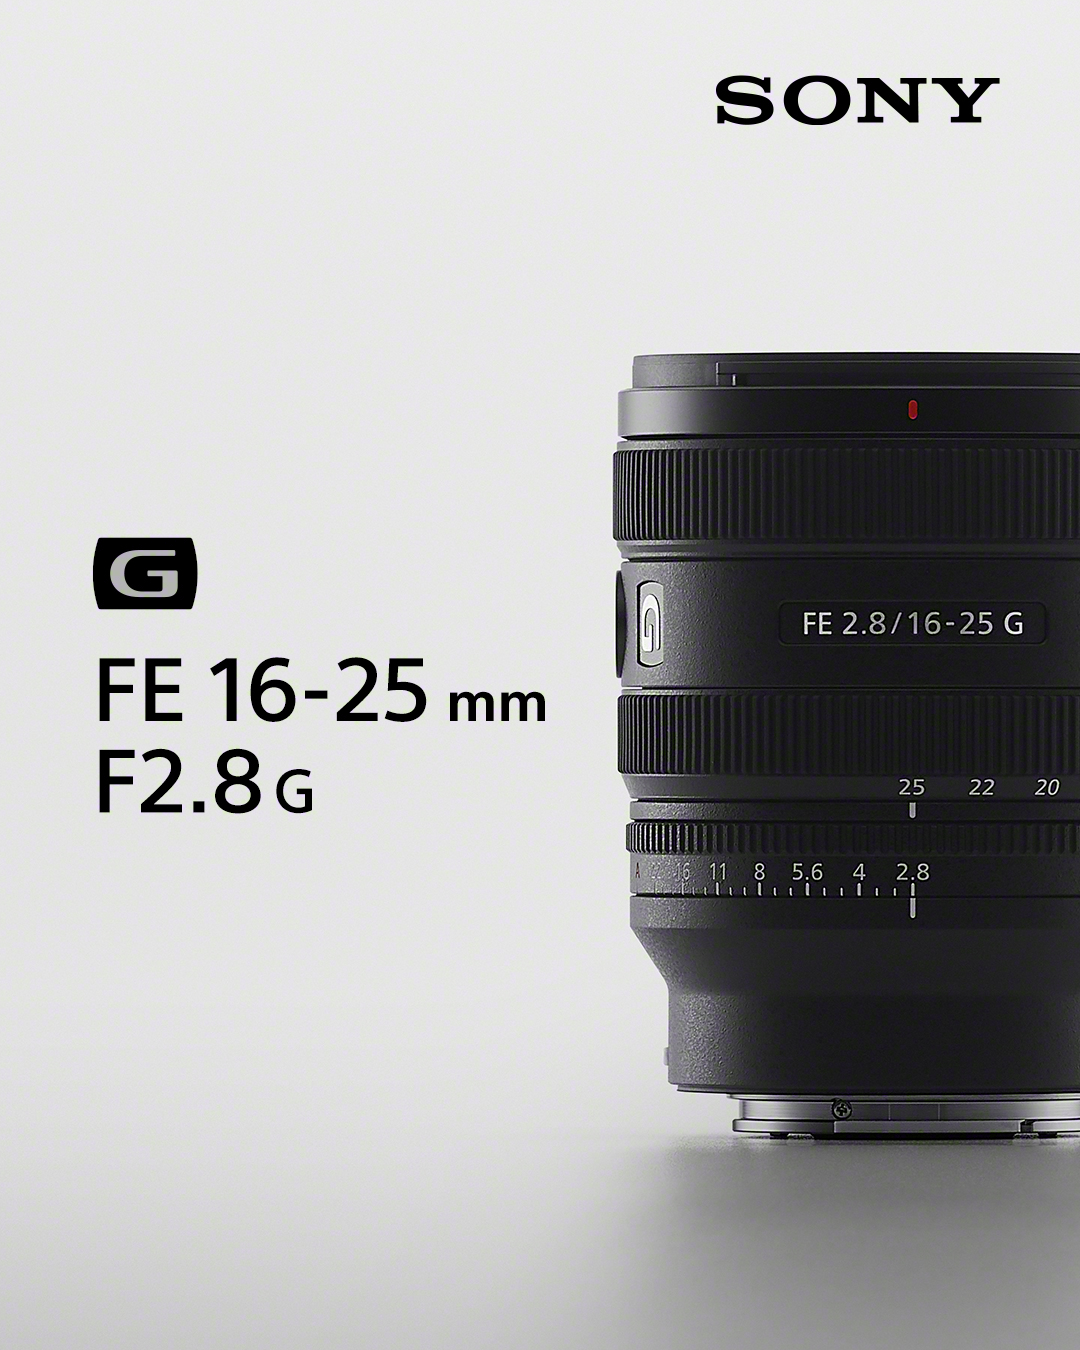 New Release:  Sony FE 16-25mm F2.8 G